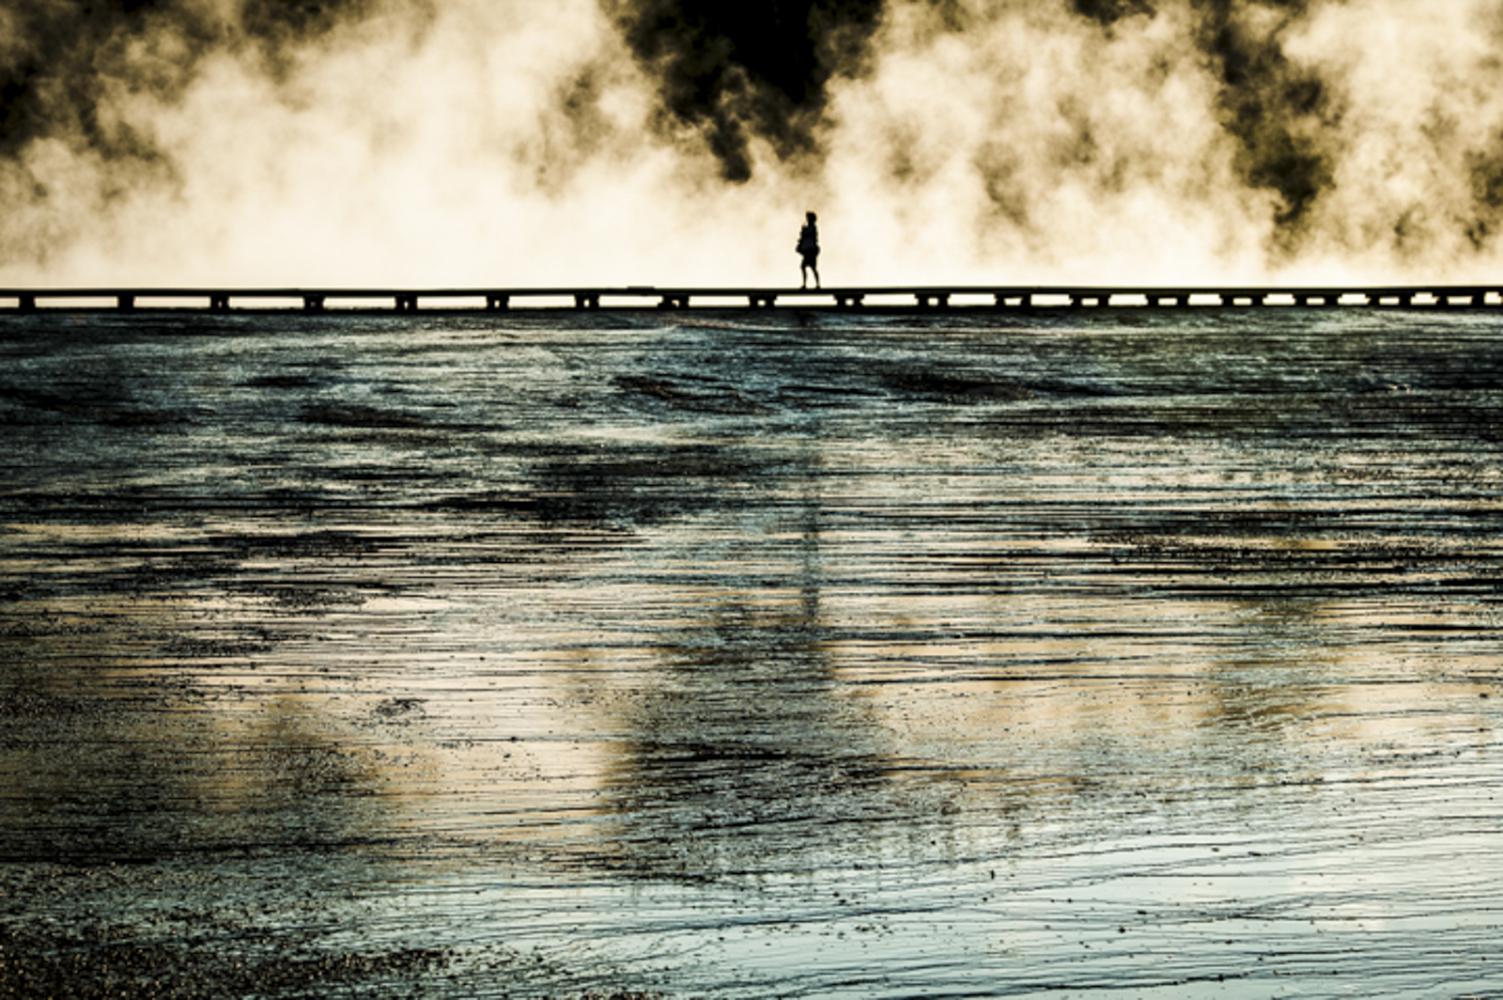 Image from ENVIRONMENT - A women walks on a plank overlooking a geyser in...